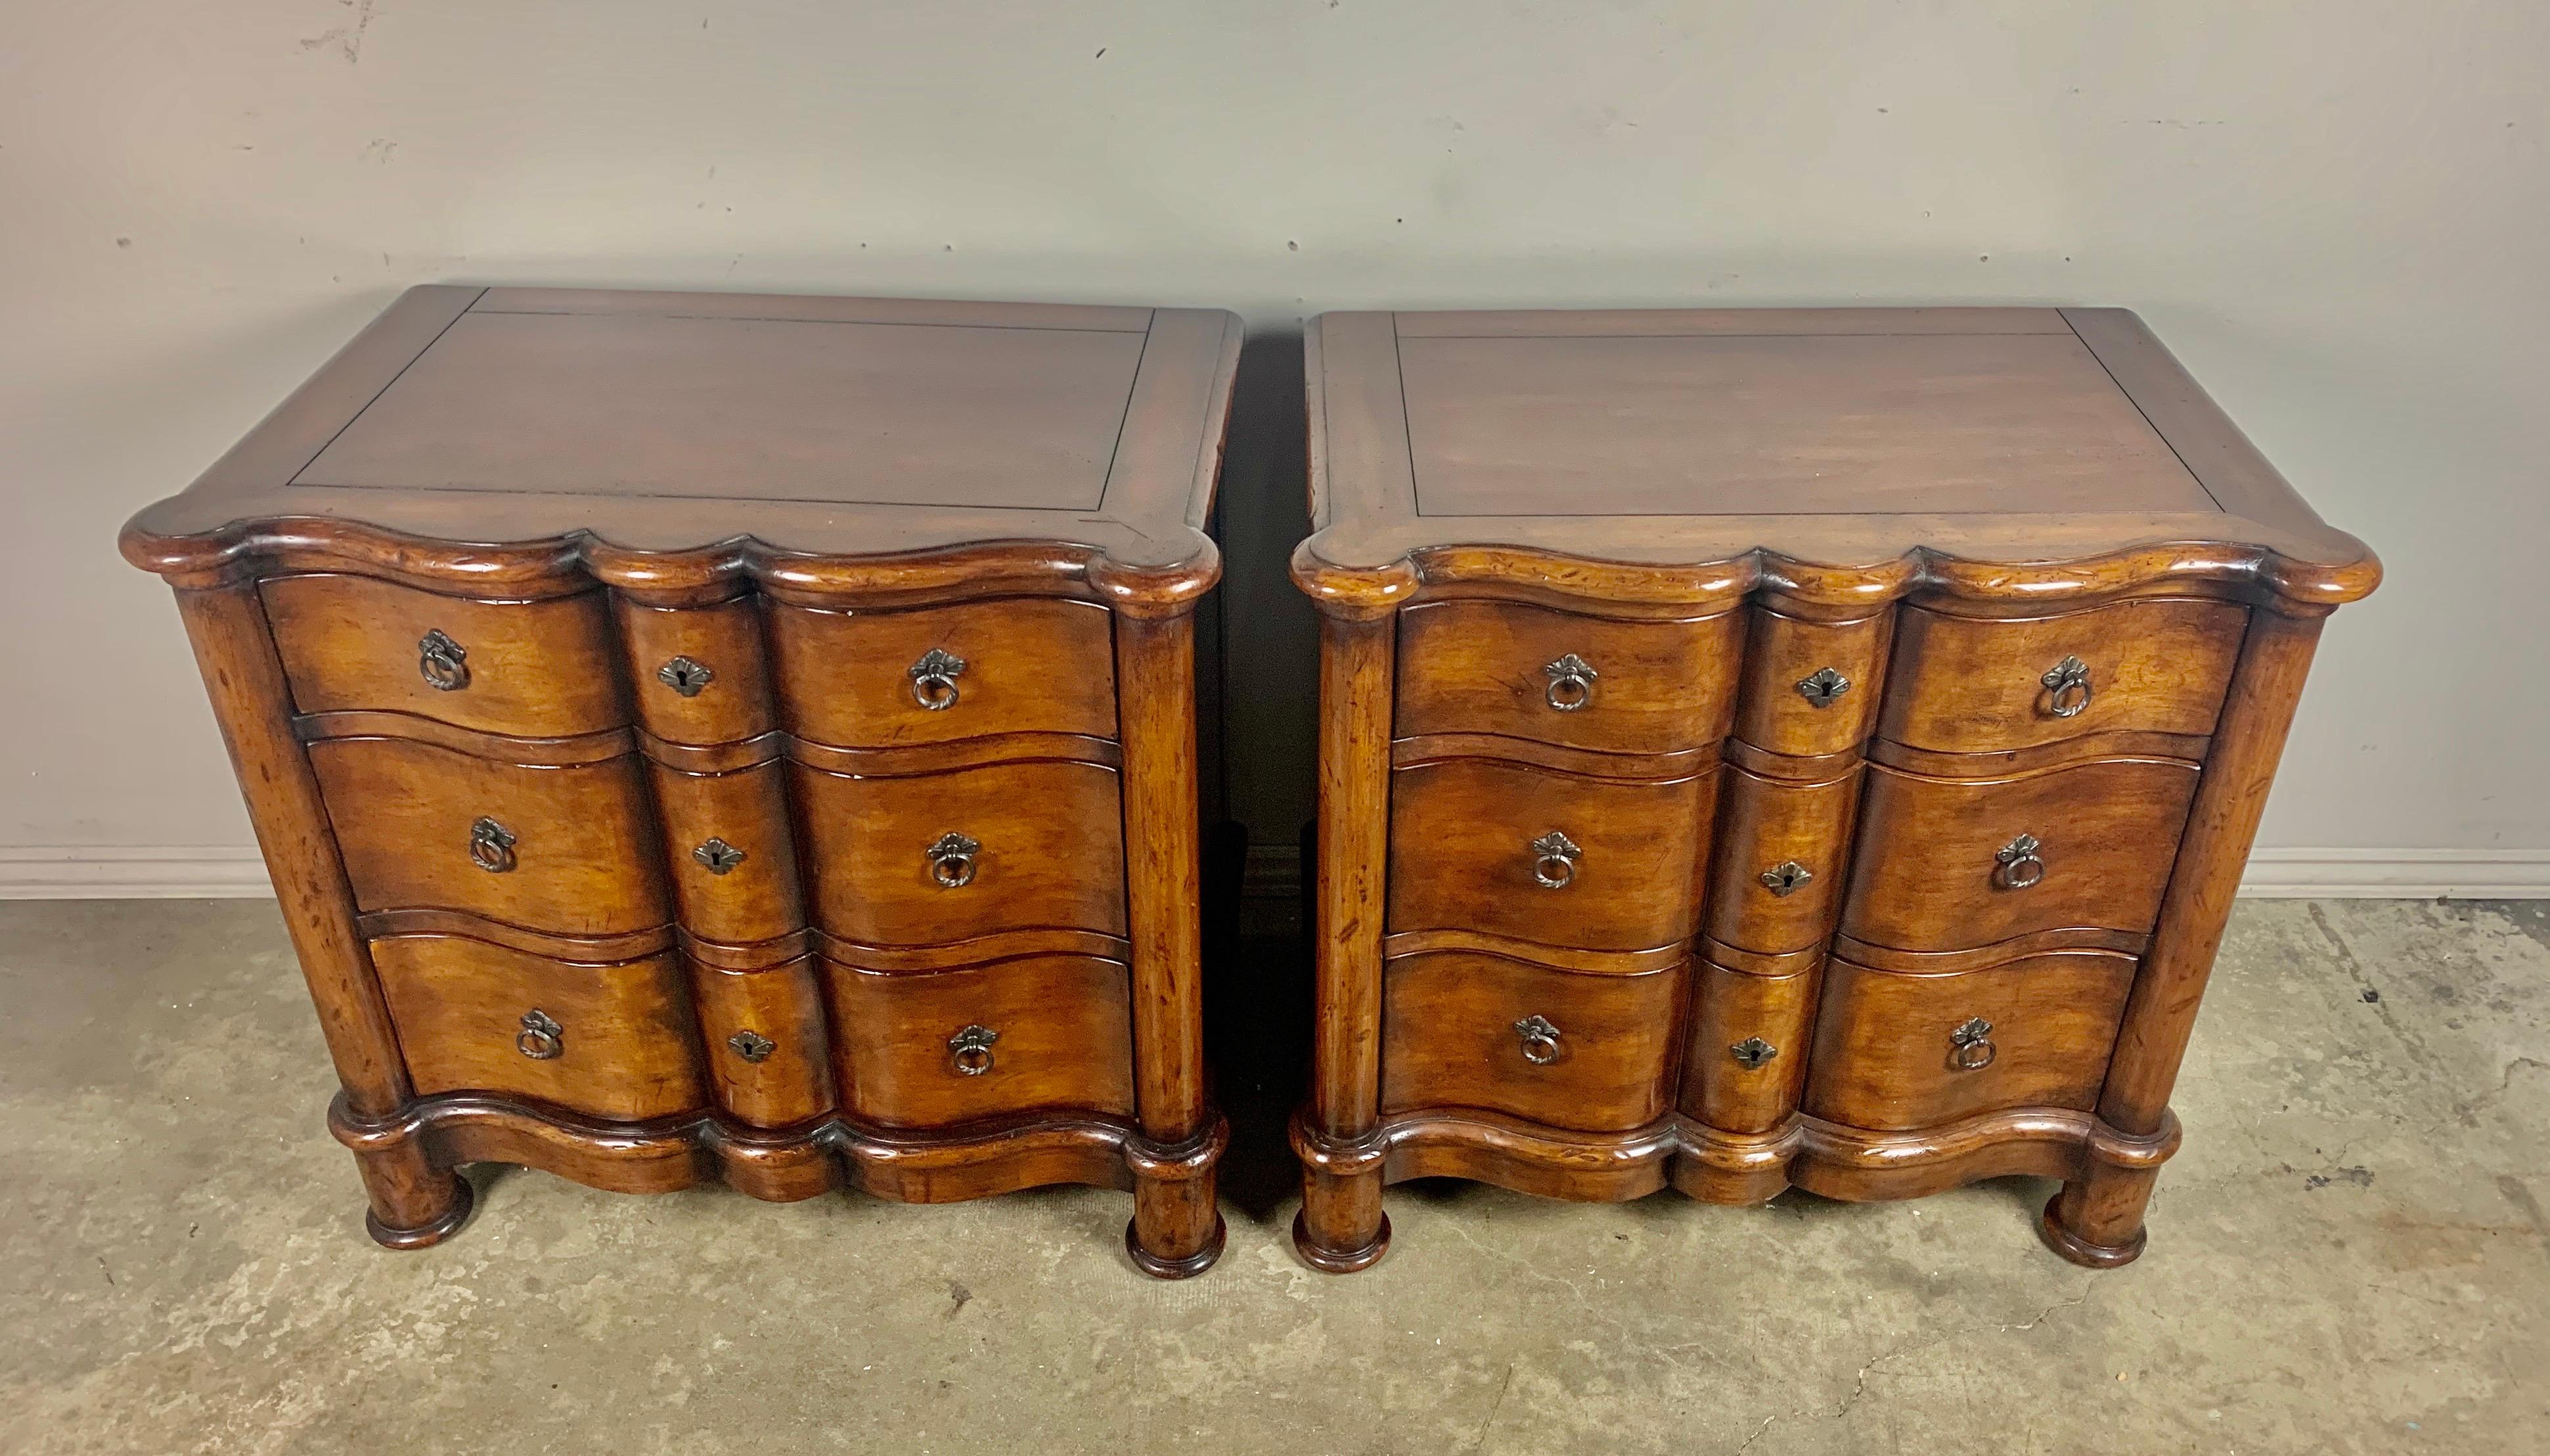 A pair of Italian walnut 3-drawer chests with beautiful scalloped fronts. The chests stand of four cylindrical feet.